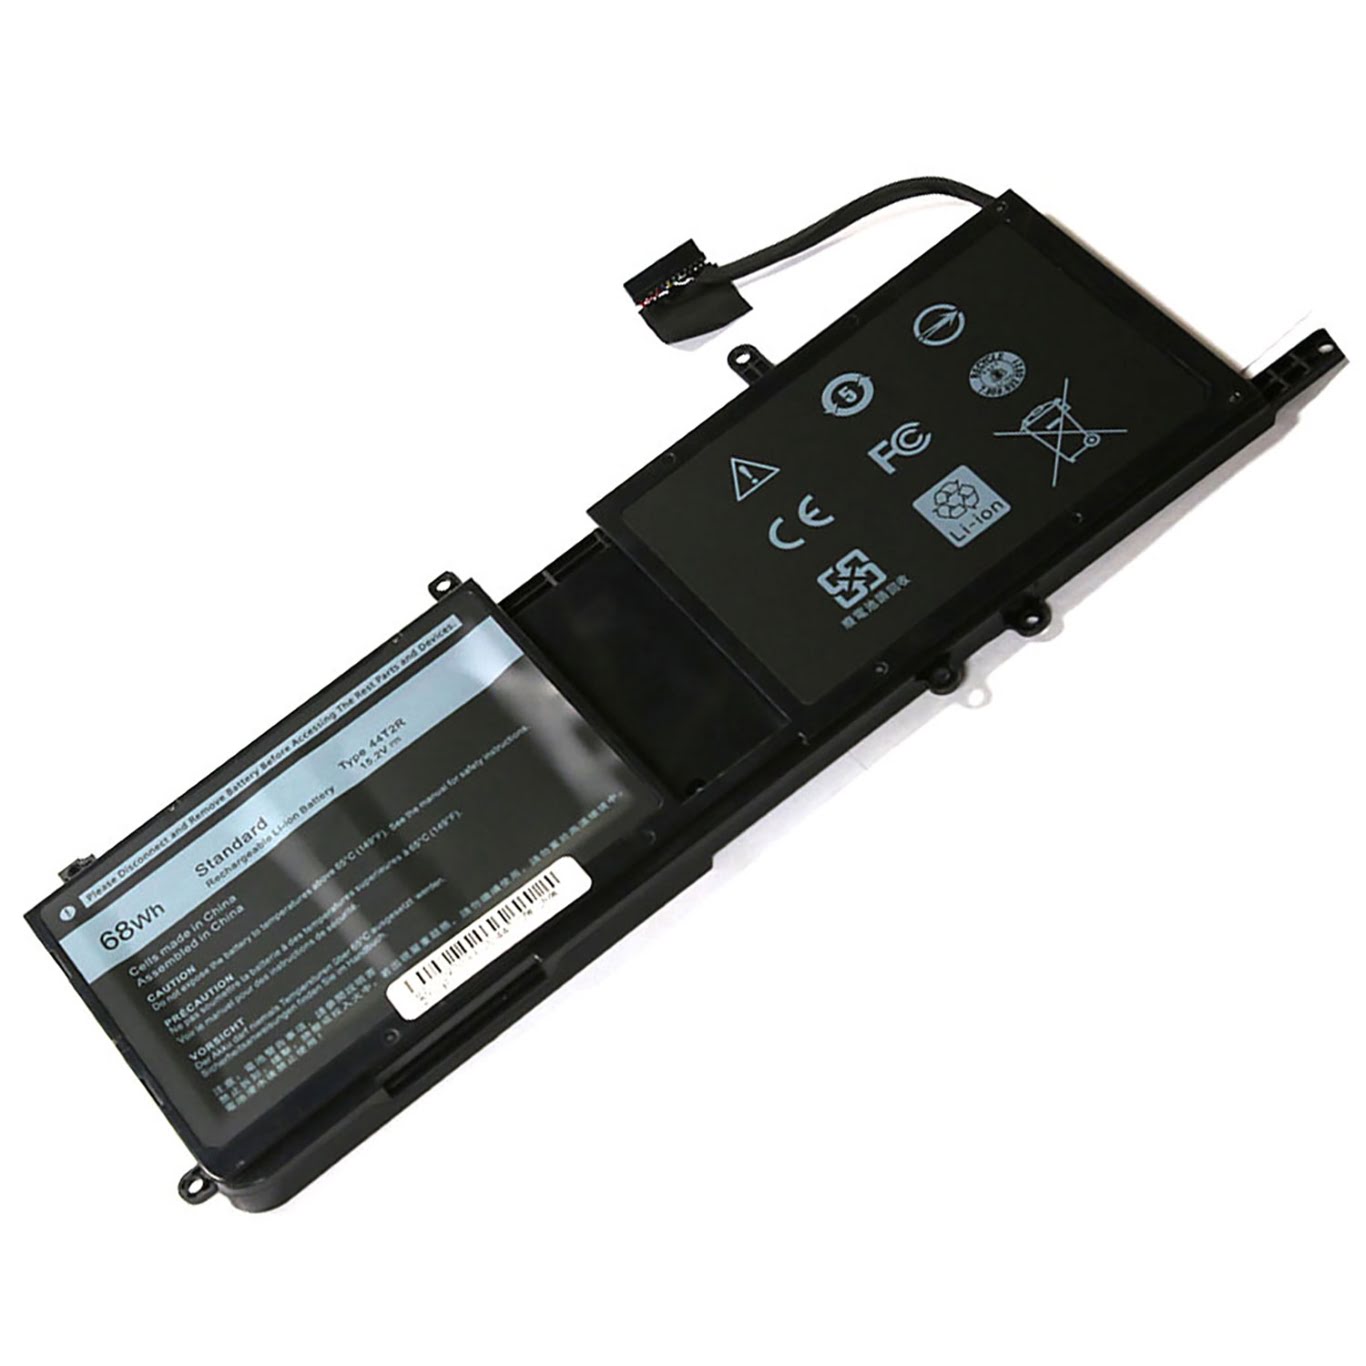 0546FF, 09NJM1 replacement Laptop Battery for Dell ALIENWARE 15, Alienware 15 R3, 15.2v, 68wh